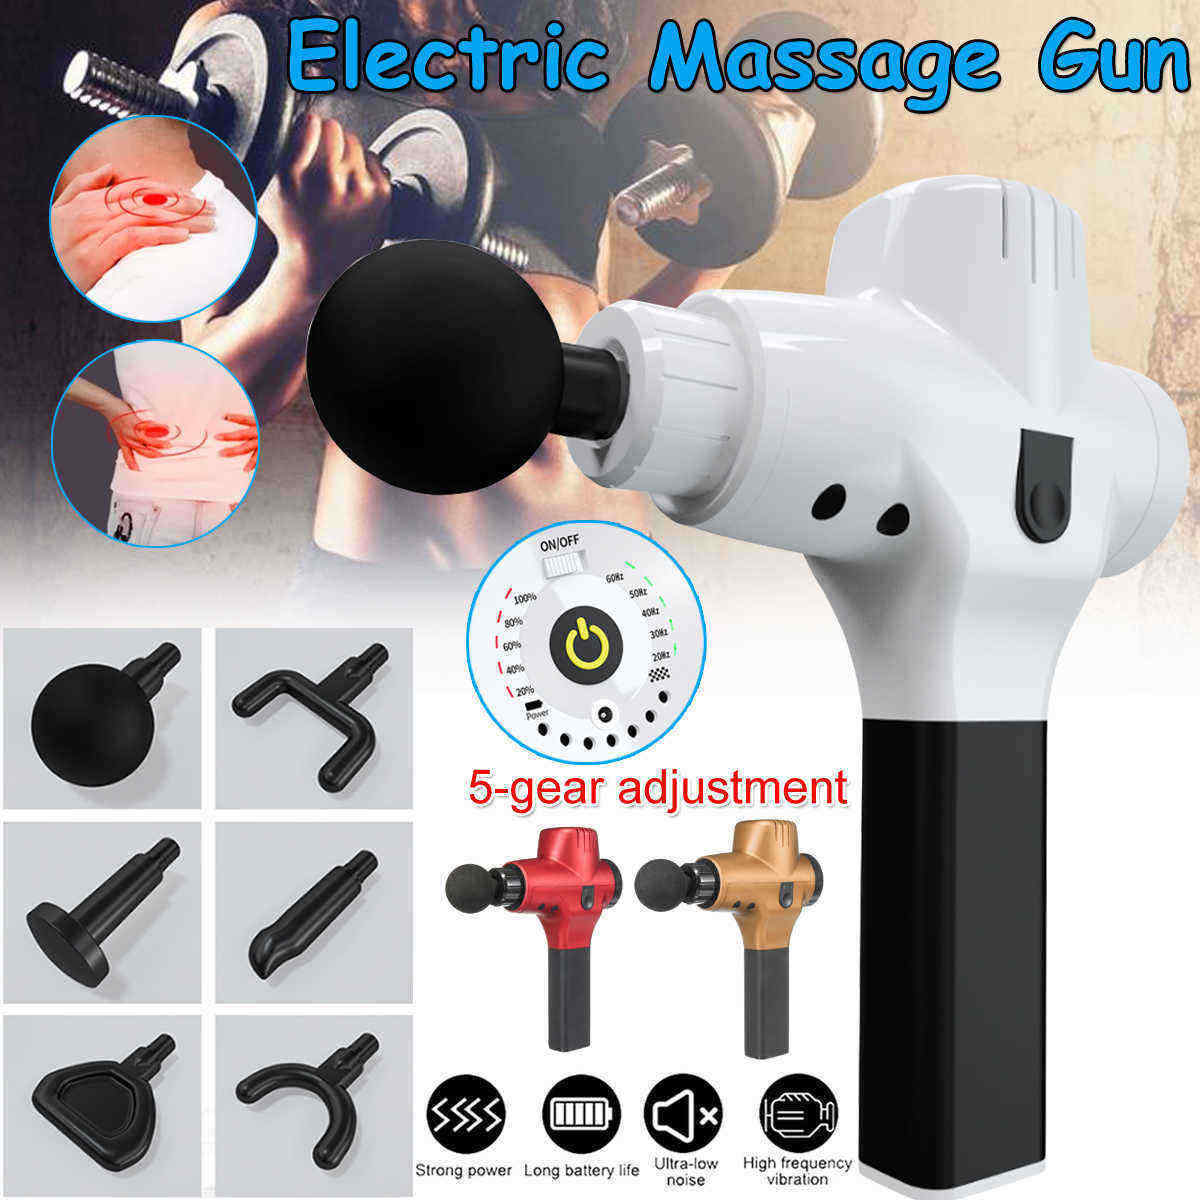 100-240V-Electric-Percussive-Massager-Rechargeable-Hand-Held-Vibration-Therapy-Device-with-6-Heads-1535822